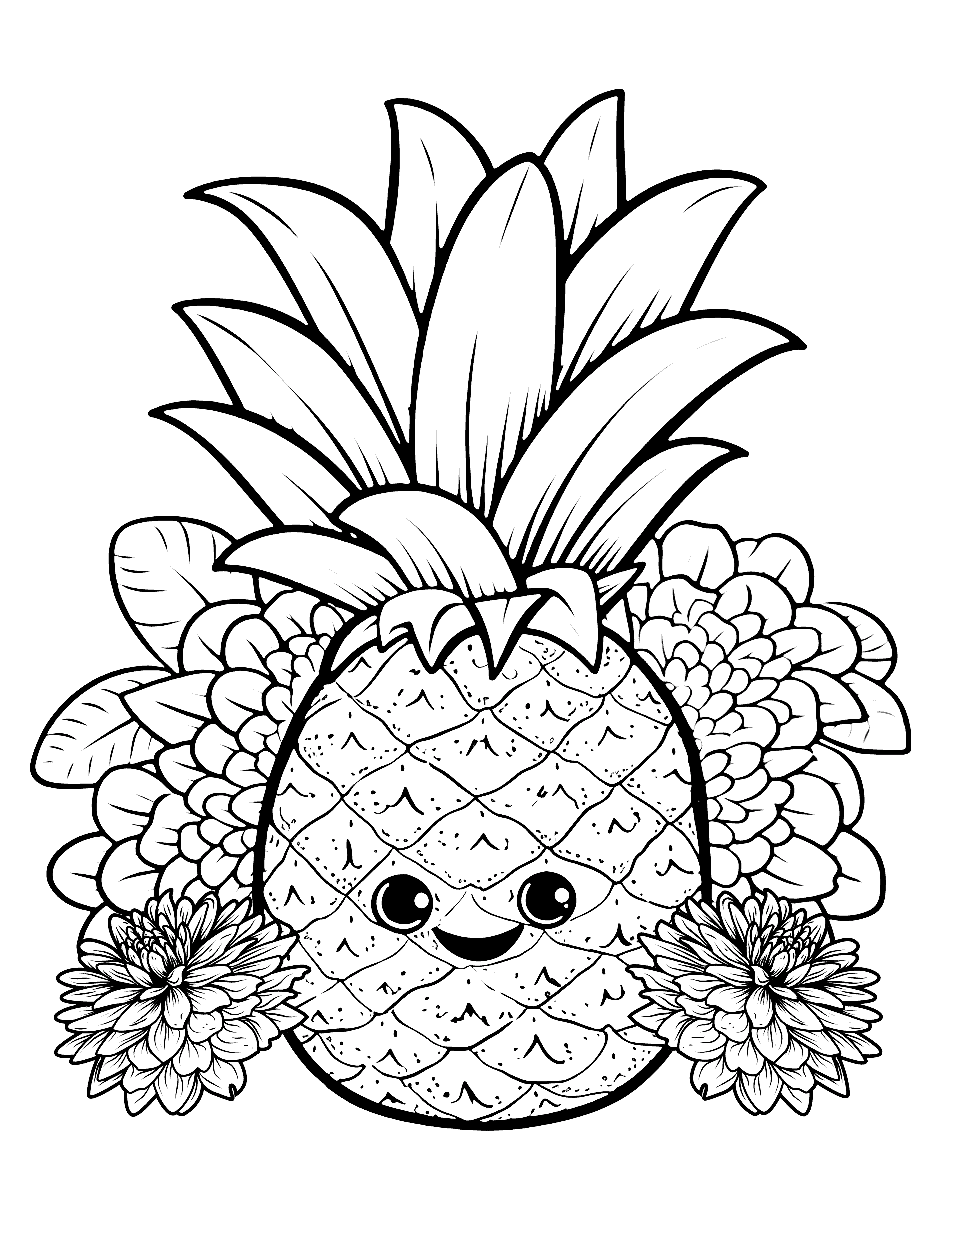 Pineapple Paradise Fruit Coloring Page - A pineapple with a smiling face, surrounded by tropical flowers.